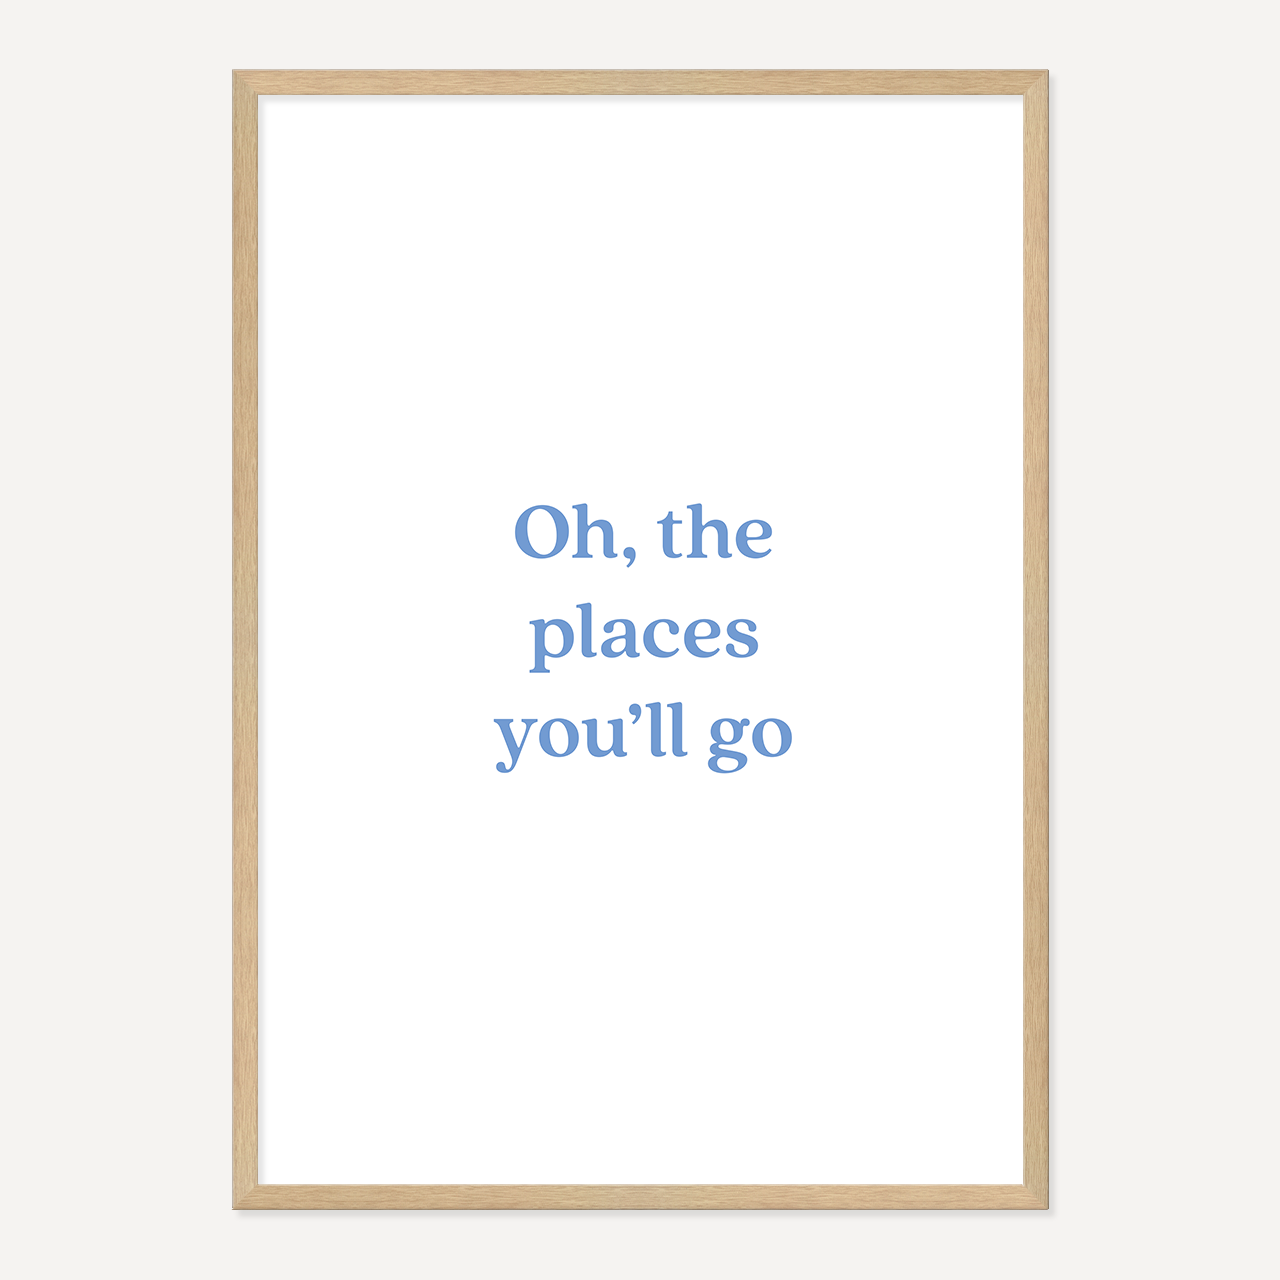 OH,THE PLACES YOU'LL GO POSTER – BLUE